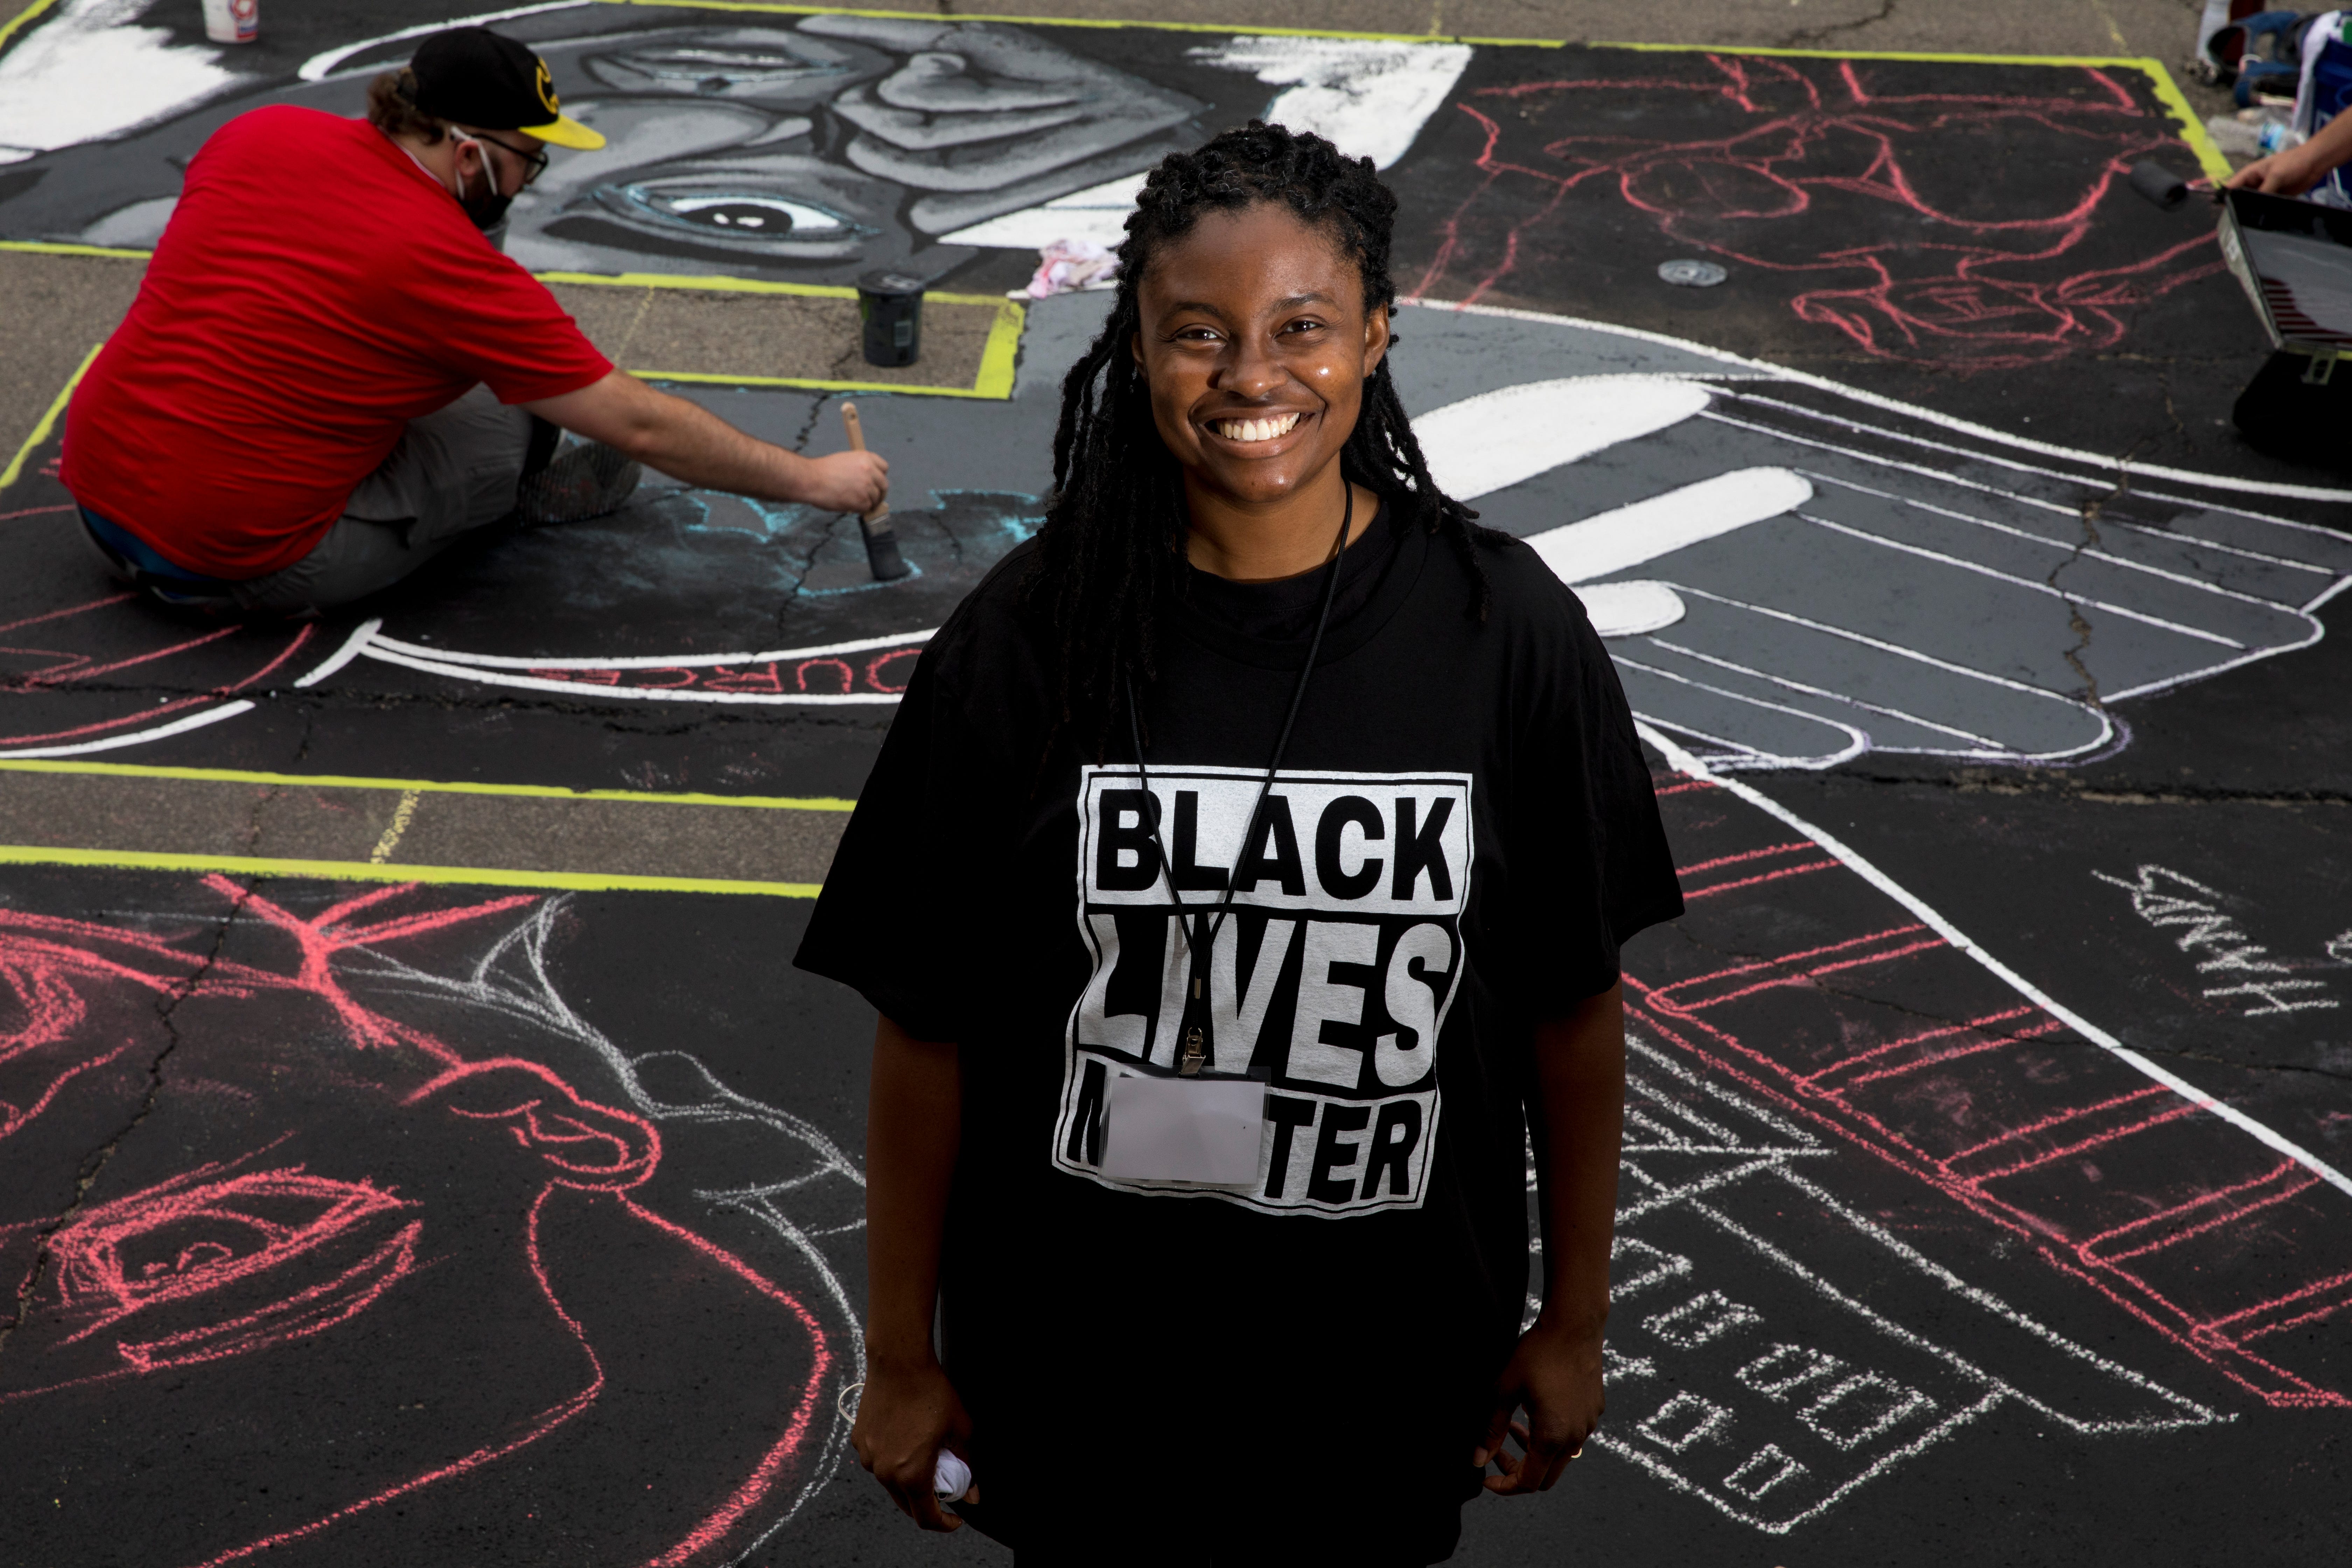 Latausha Cox stands next to the letter "E" that she is creating as part of a bigger mural that reads "Black Lives Matter!" Thursday, June 18, 2020, on Plum Street in front of City Hall in Cincinnati. Seventeen local Black artists were charged with designing and creating a letter to be part of the mural.